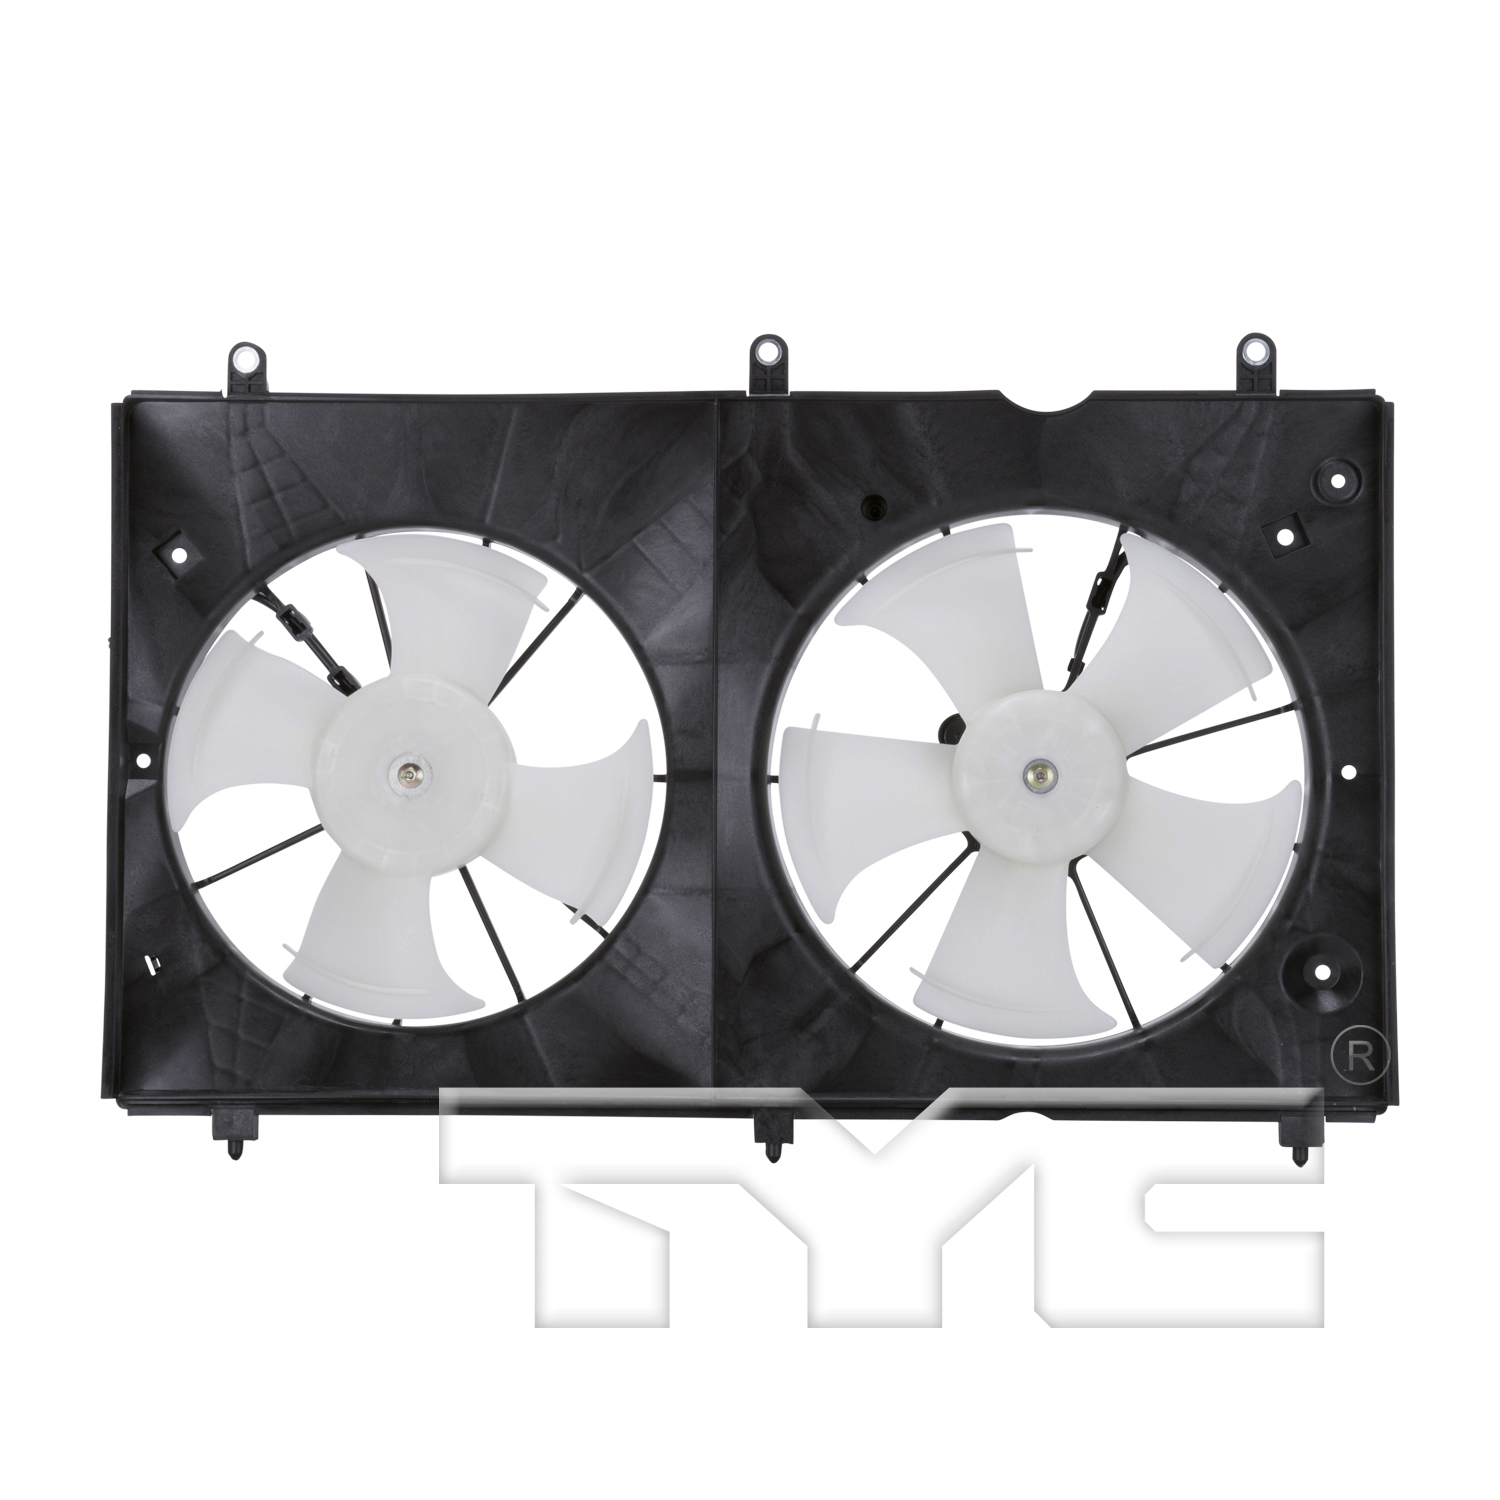 Aftermarket FAN ASSEMBLY/FAN SHROUDS for HONDA - ACCORD, ACCORD,03-06,Radiator cooling fan assy